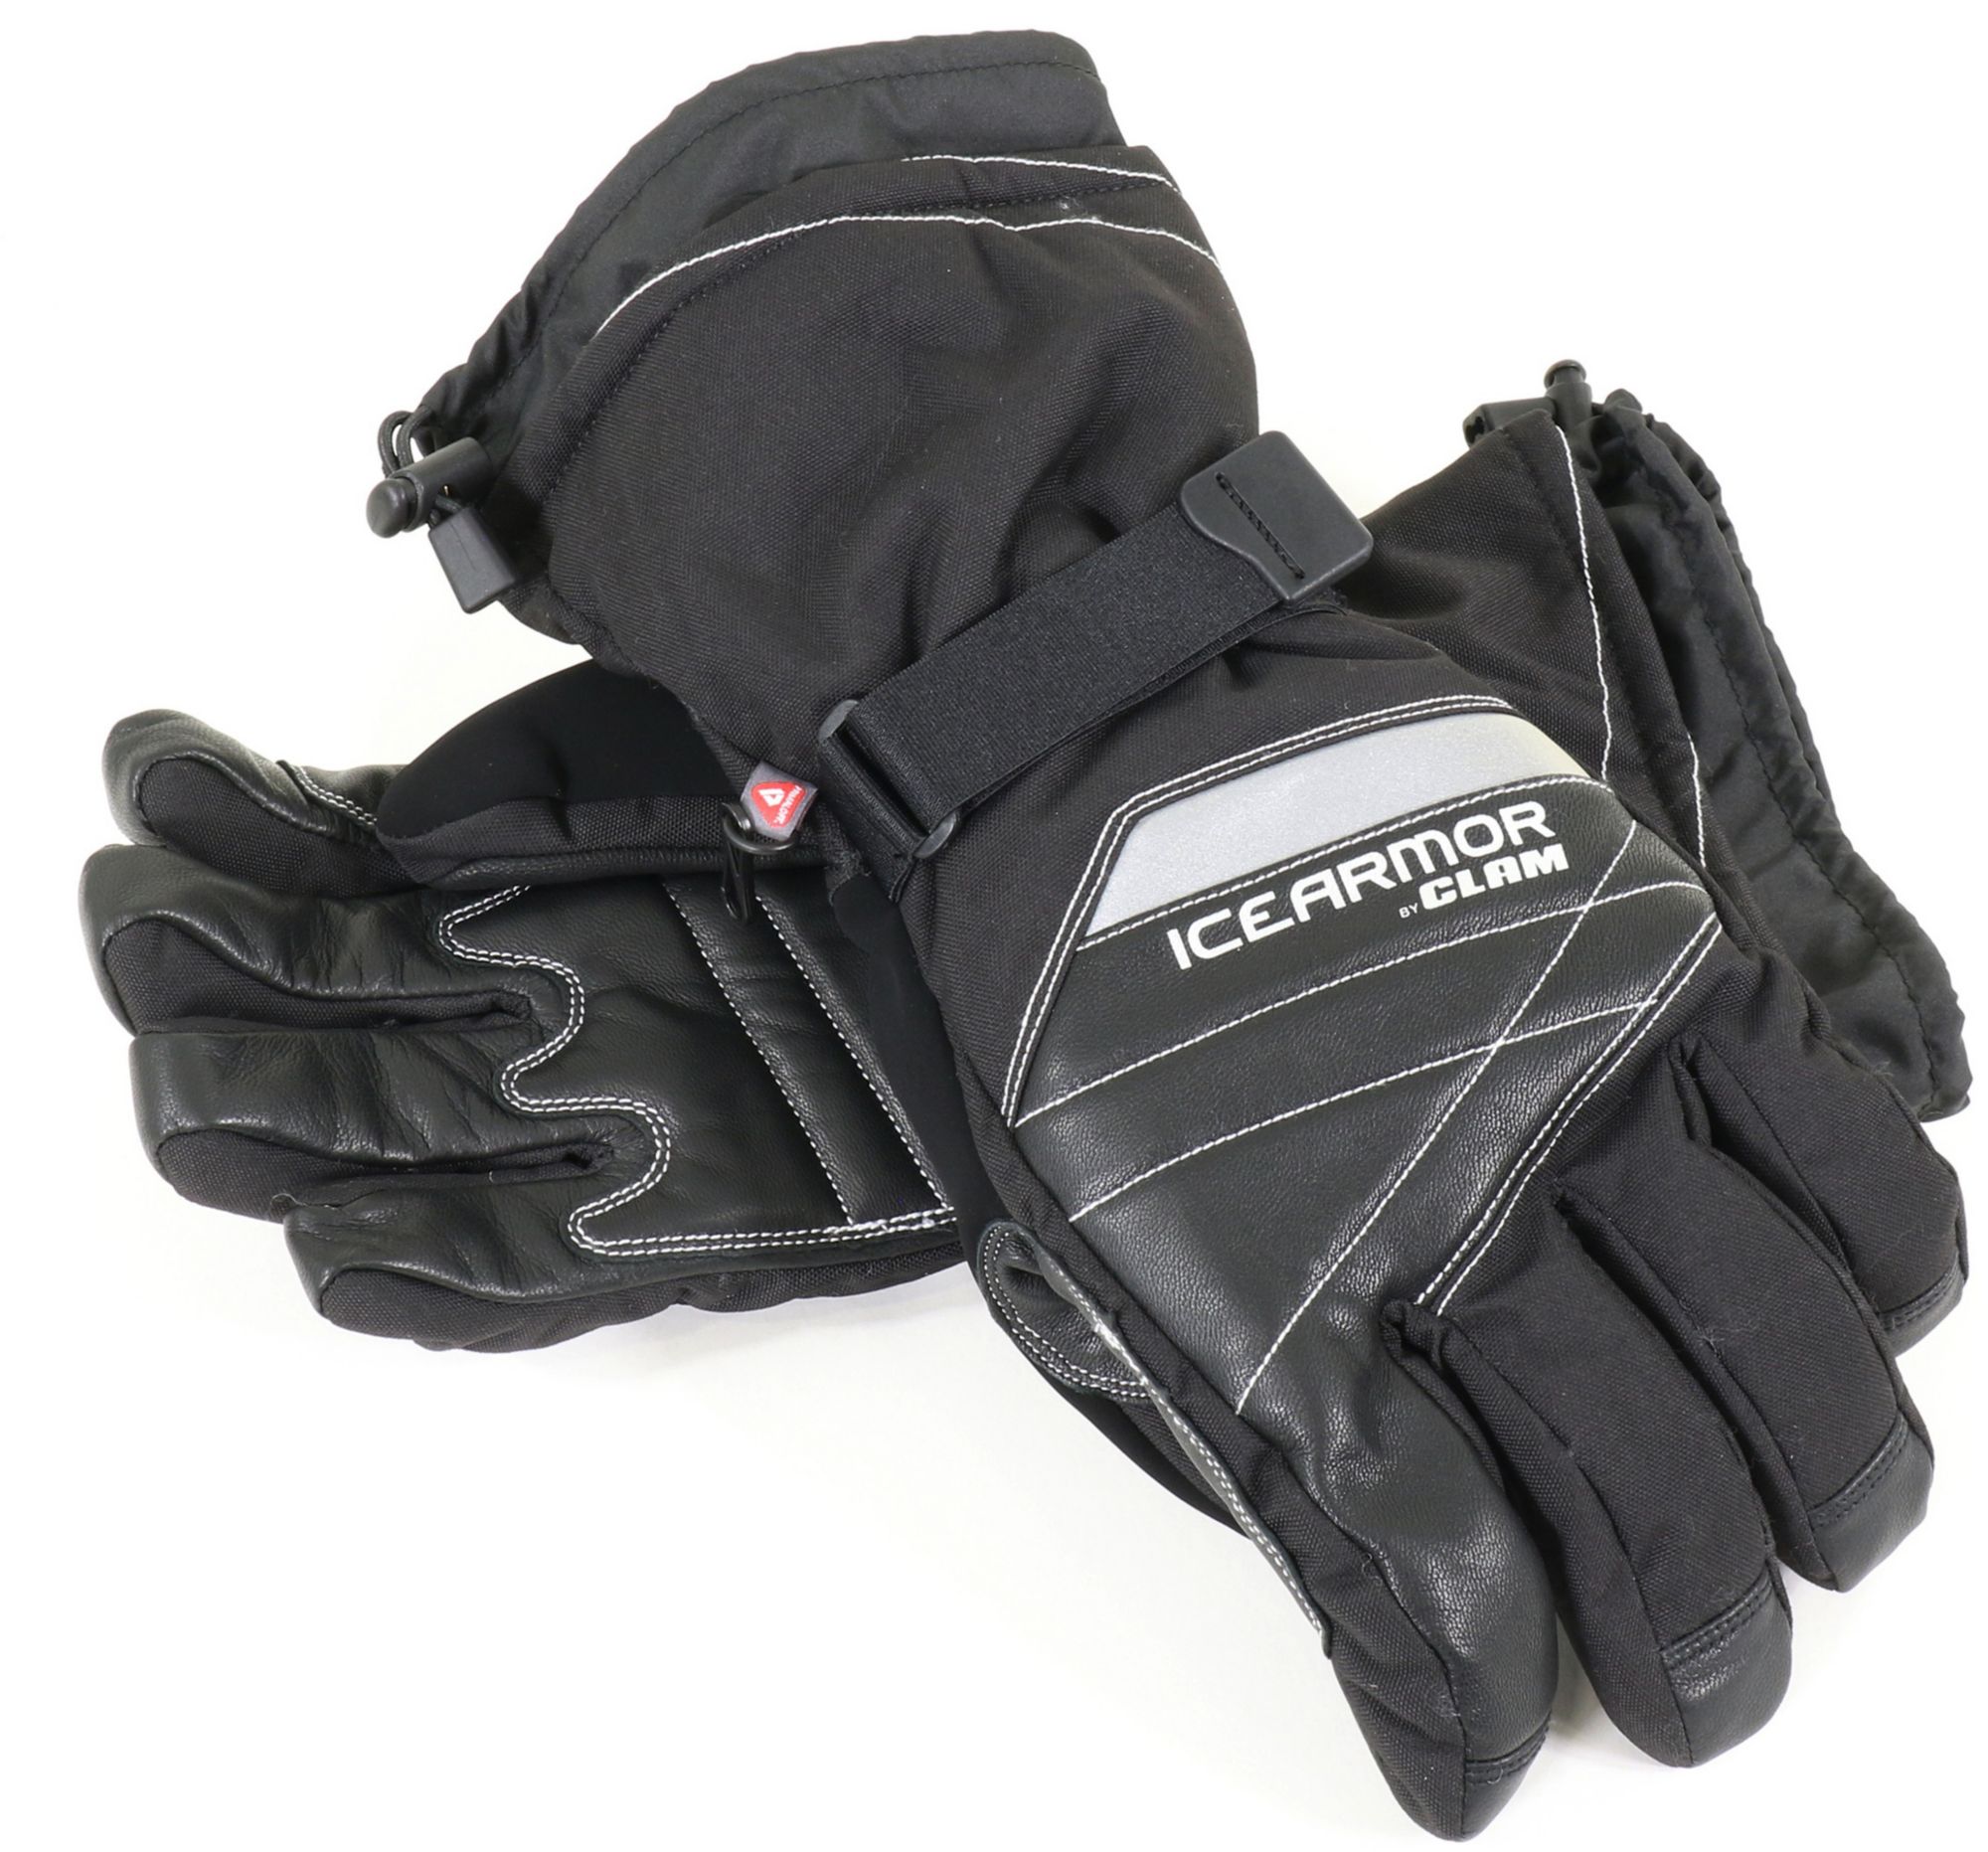 Photos - Other for Fishing Clam Outdoors Renegade Glove, Men's, XXL, Black 23CLOMRNGDGLVBLCKFIC